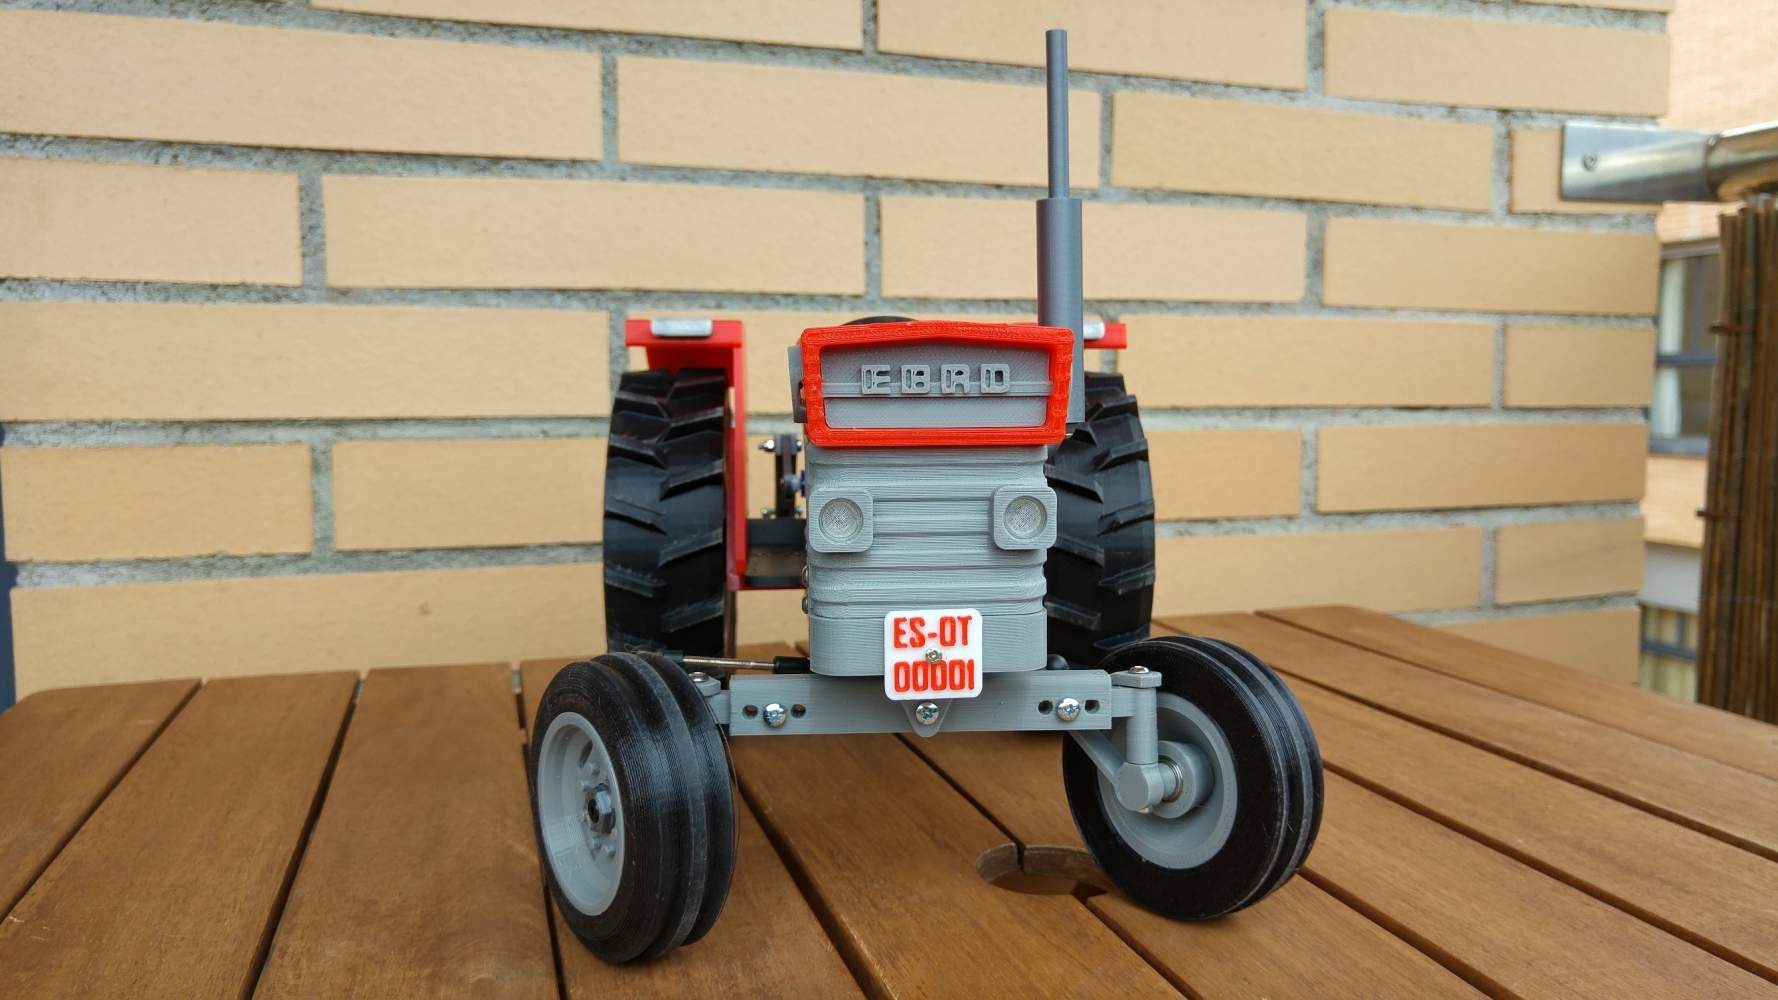 1000x1000 openrc tractor front es0001